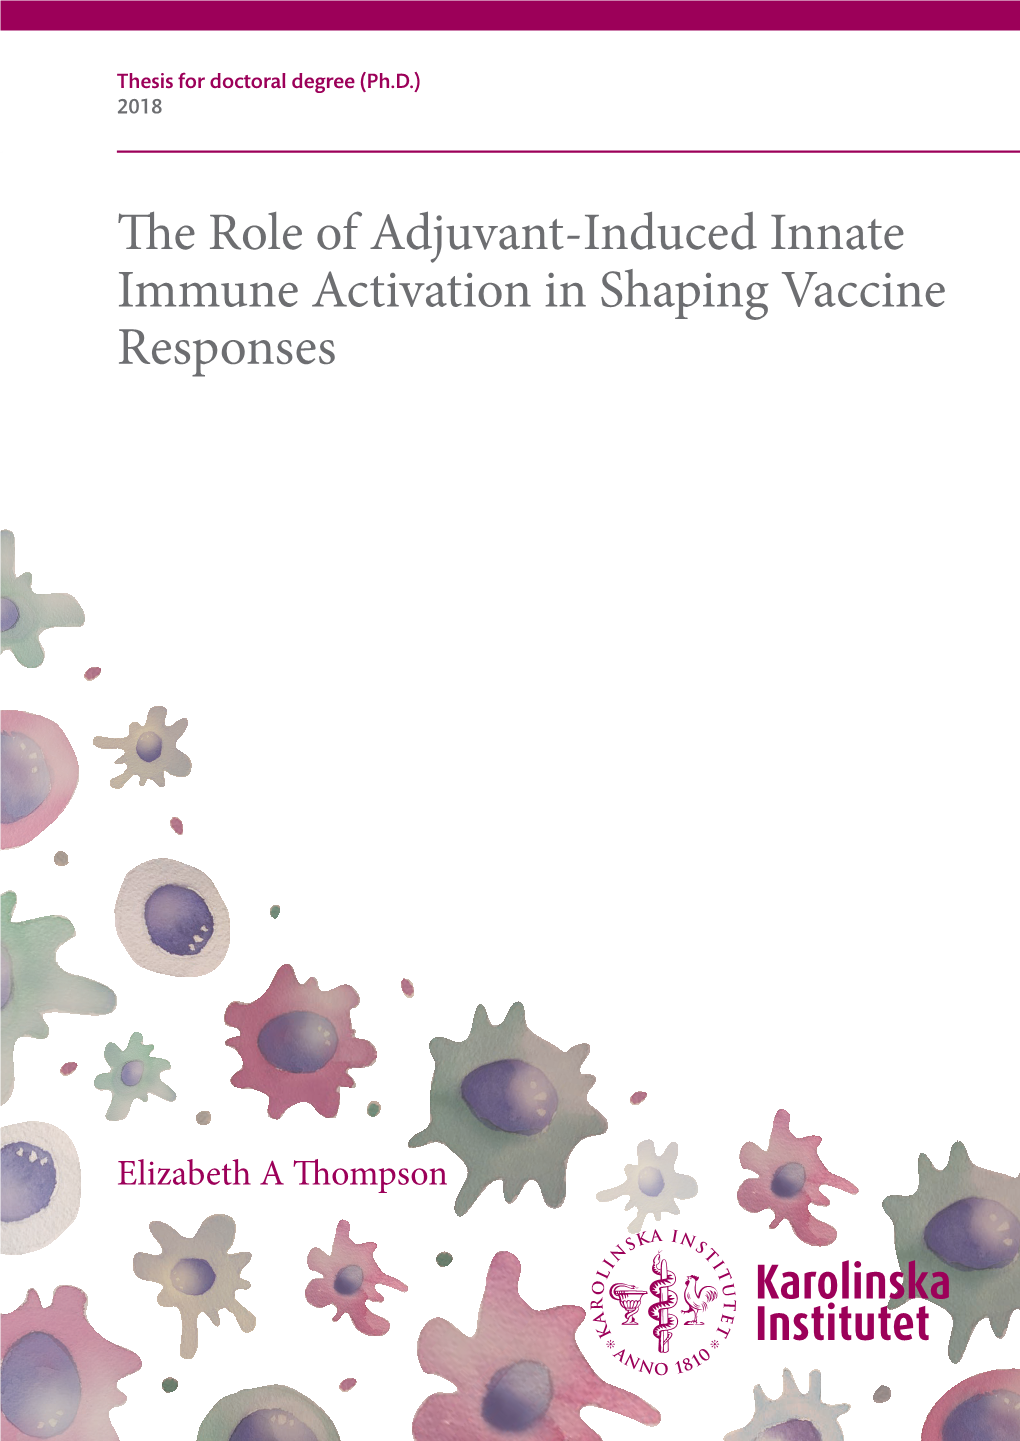 The Role of Adjuvant-Induced Innate Immune Activation in Shaping Vaccine Responses